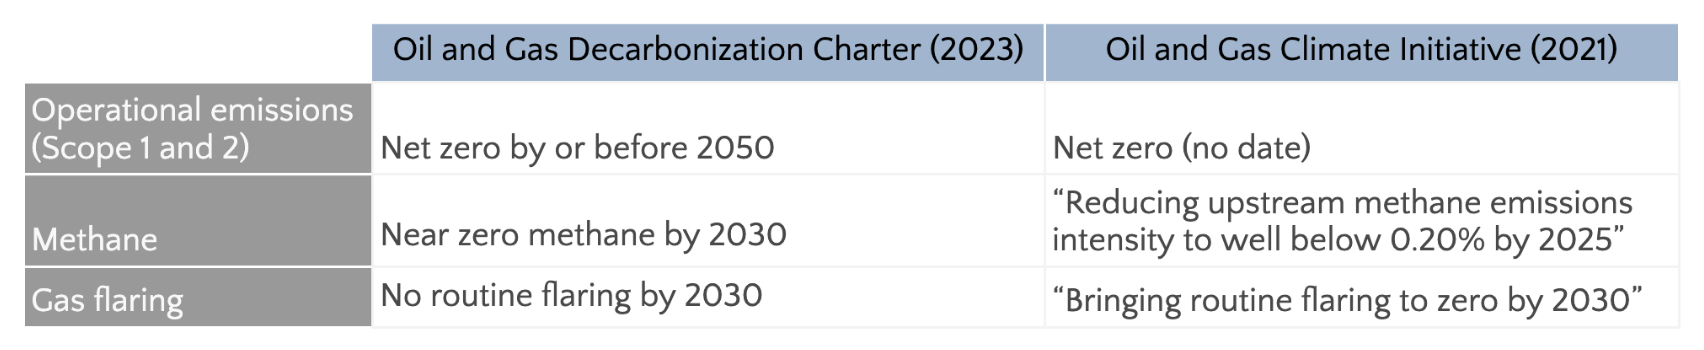 Table comparing the new charter with the Oil and Gas Climate Initiative (OGCI) launched nearly a decade ago, across the categories Operational Emissions, Methane and Gas Flaring